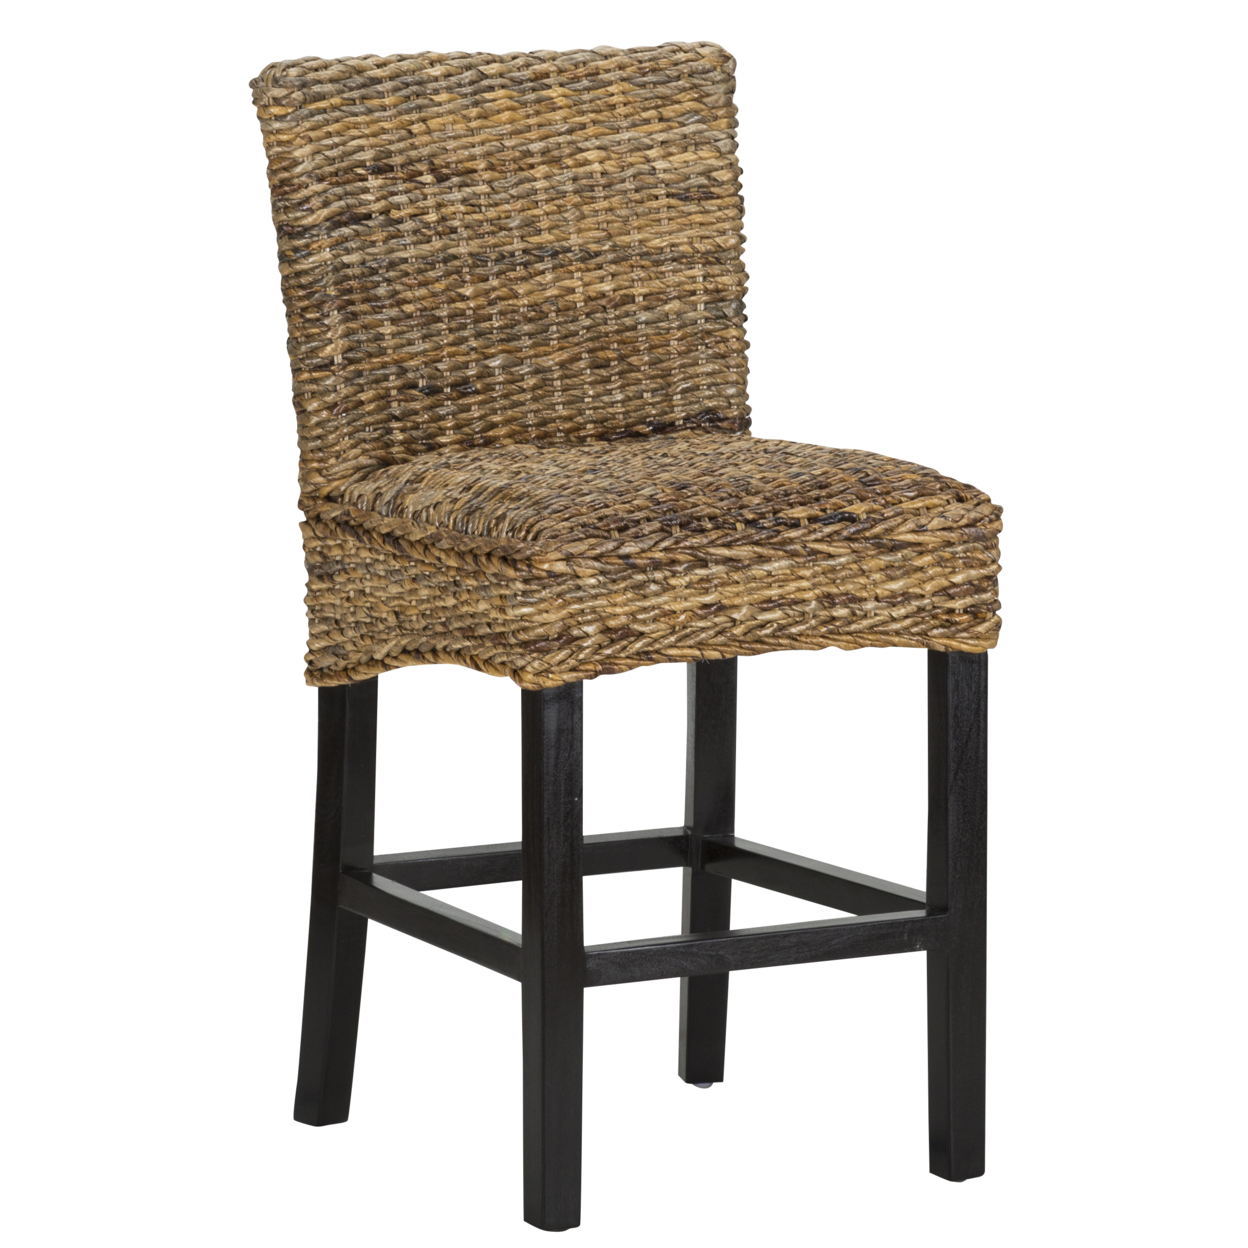 Woven Rattan Counter Height Stool With Wooden Legs And Low Profile Backrest, Brown And Black- Saltoro Sherpi